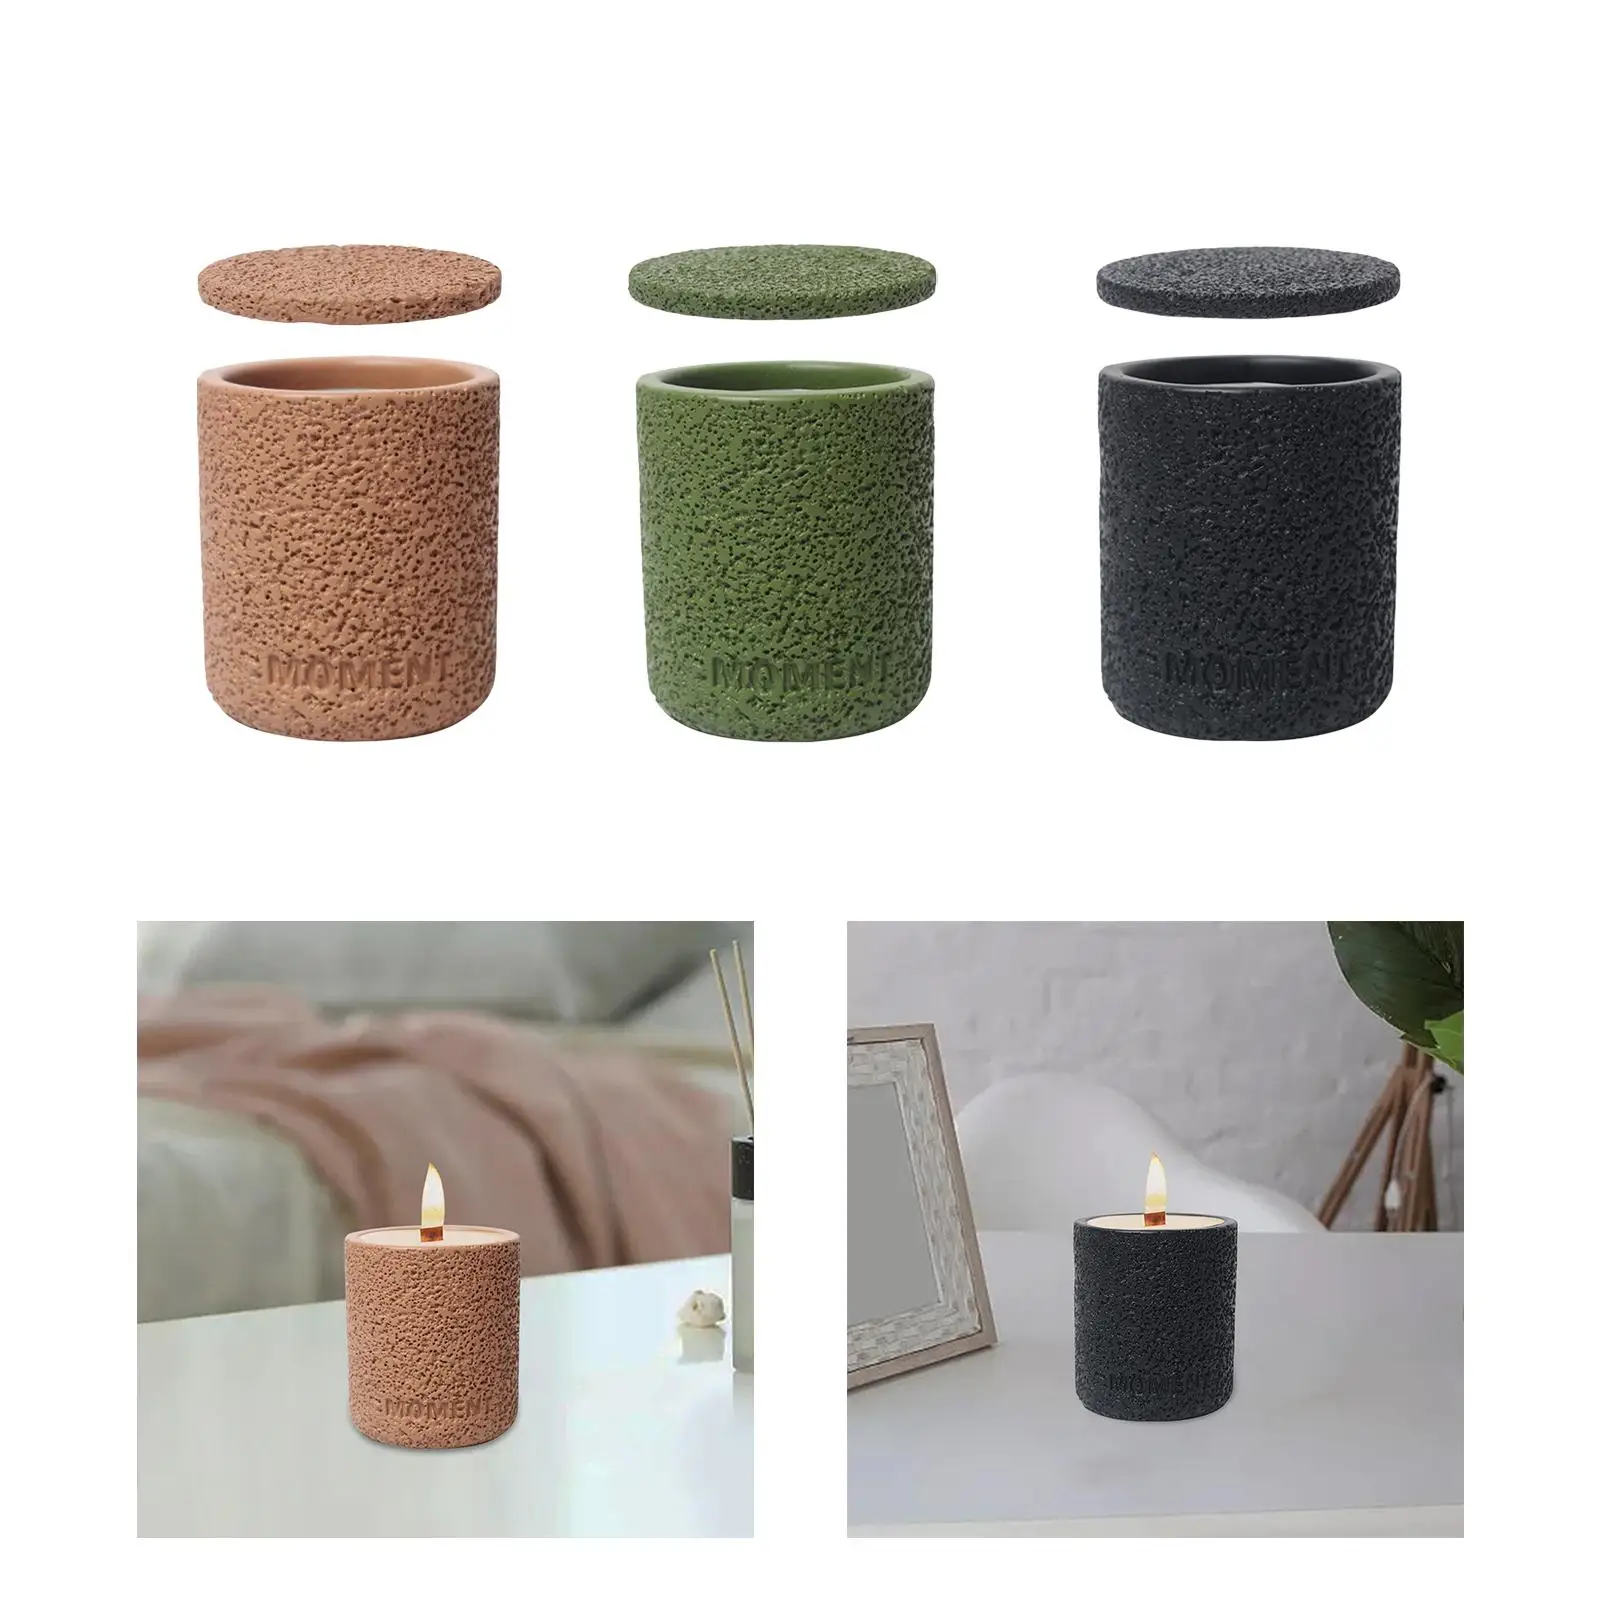 Votive Candle Holders Festival Wedding Candle Holders for Tea Lights Candle